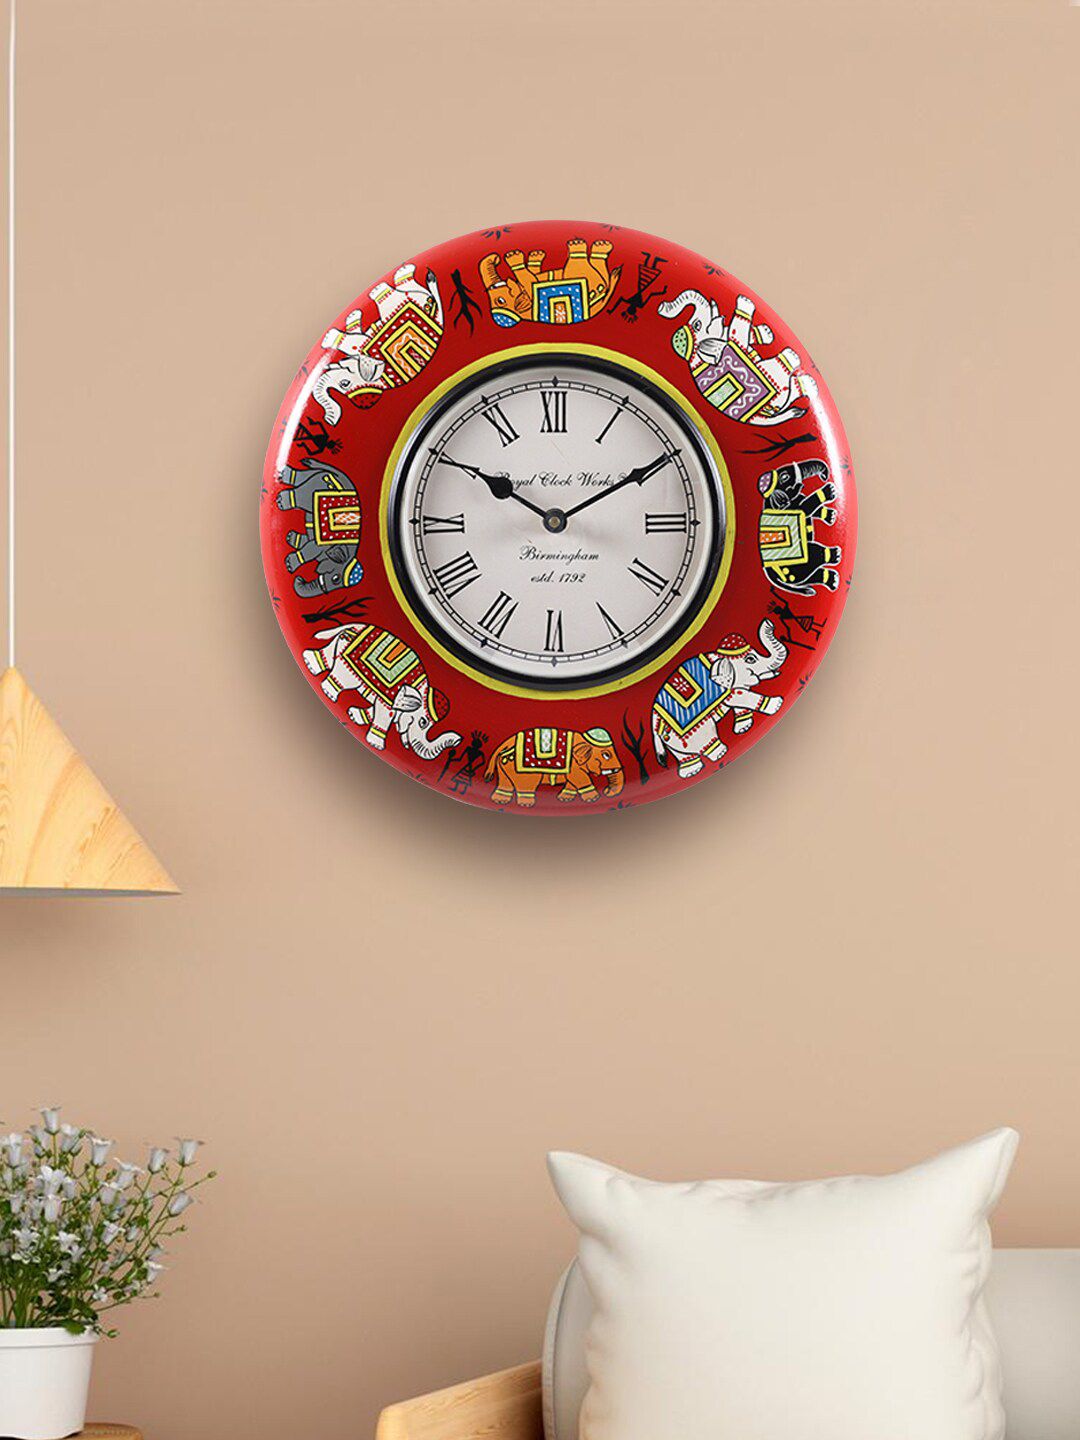 Aapno Rajasthan Red & White Elephant Printed Round Traditional Analogue Wall Clock 29cm Price in India